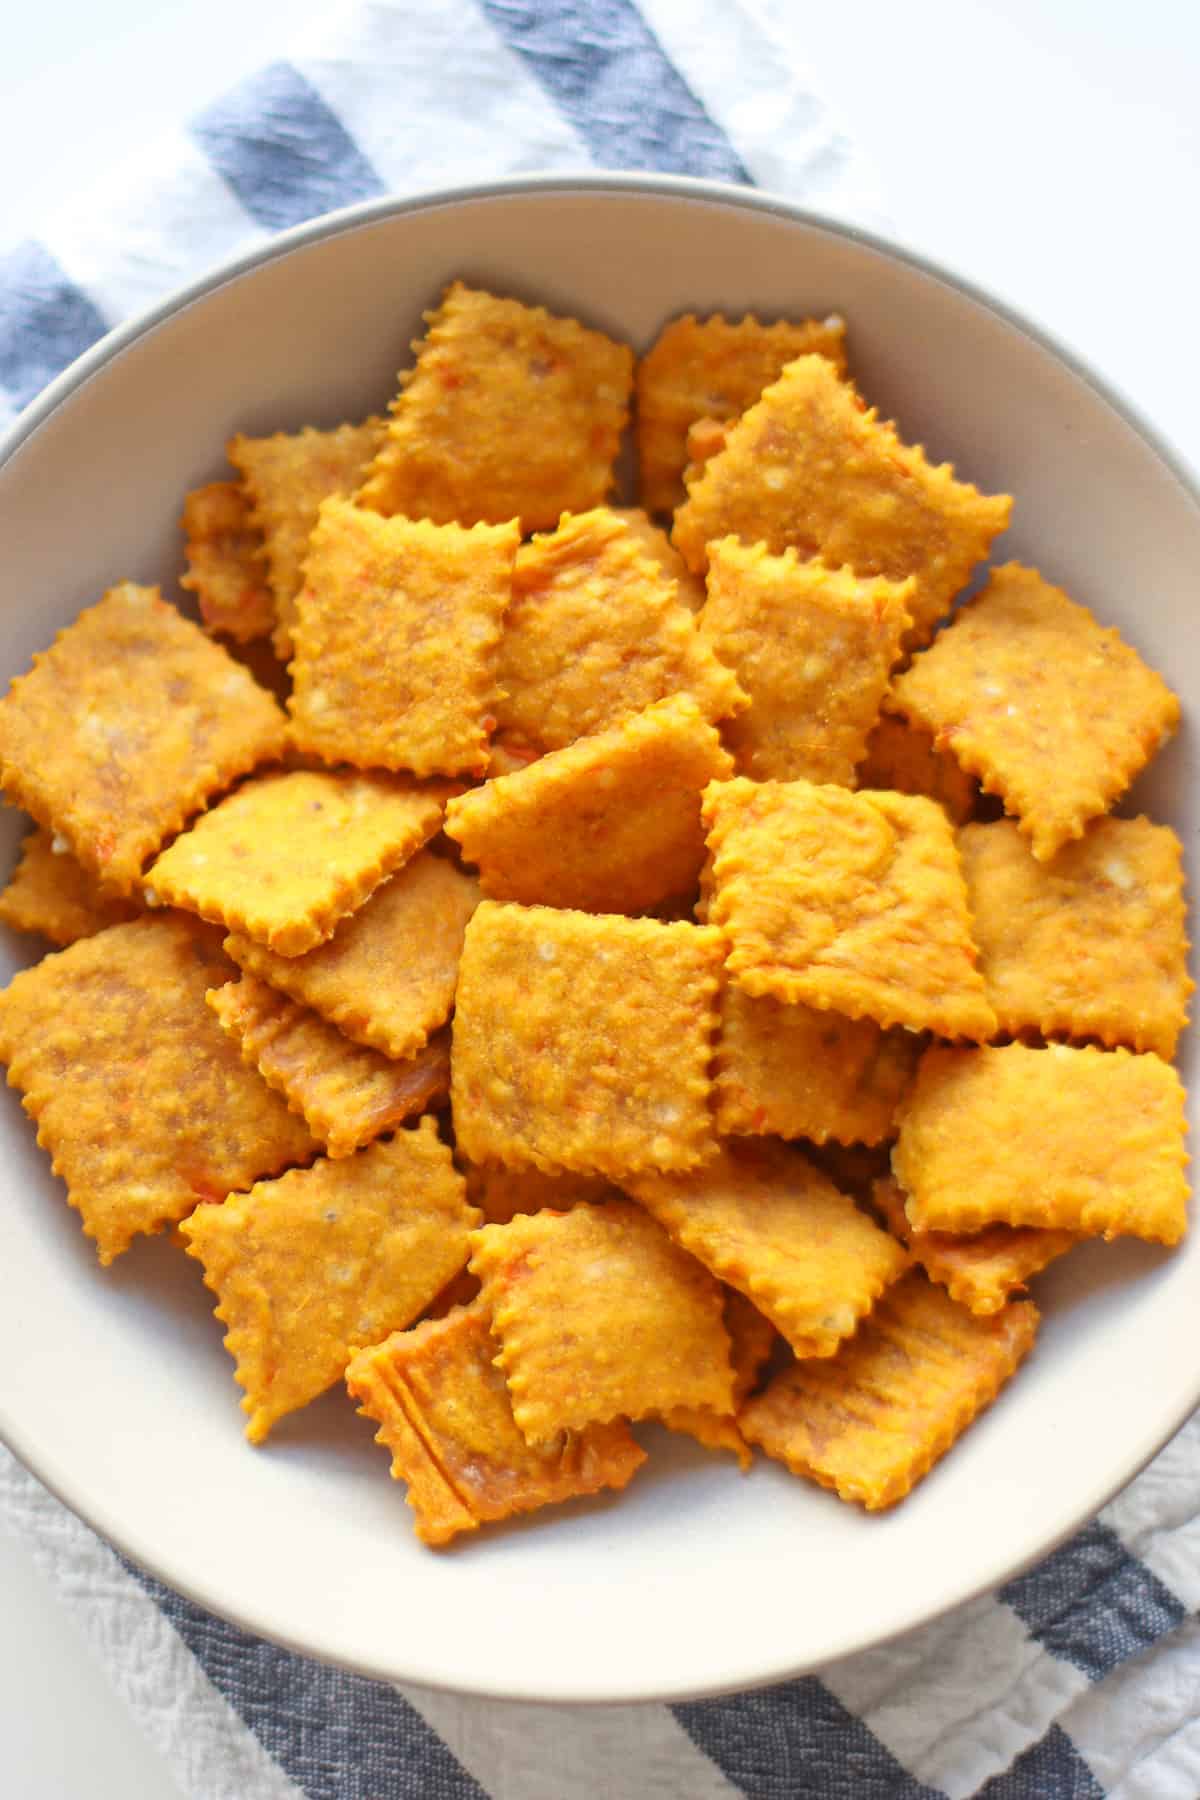 A bowl of baked cheese crackers.